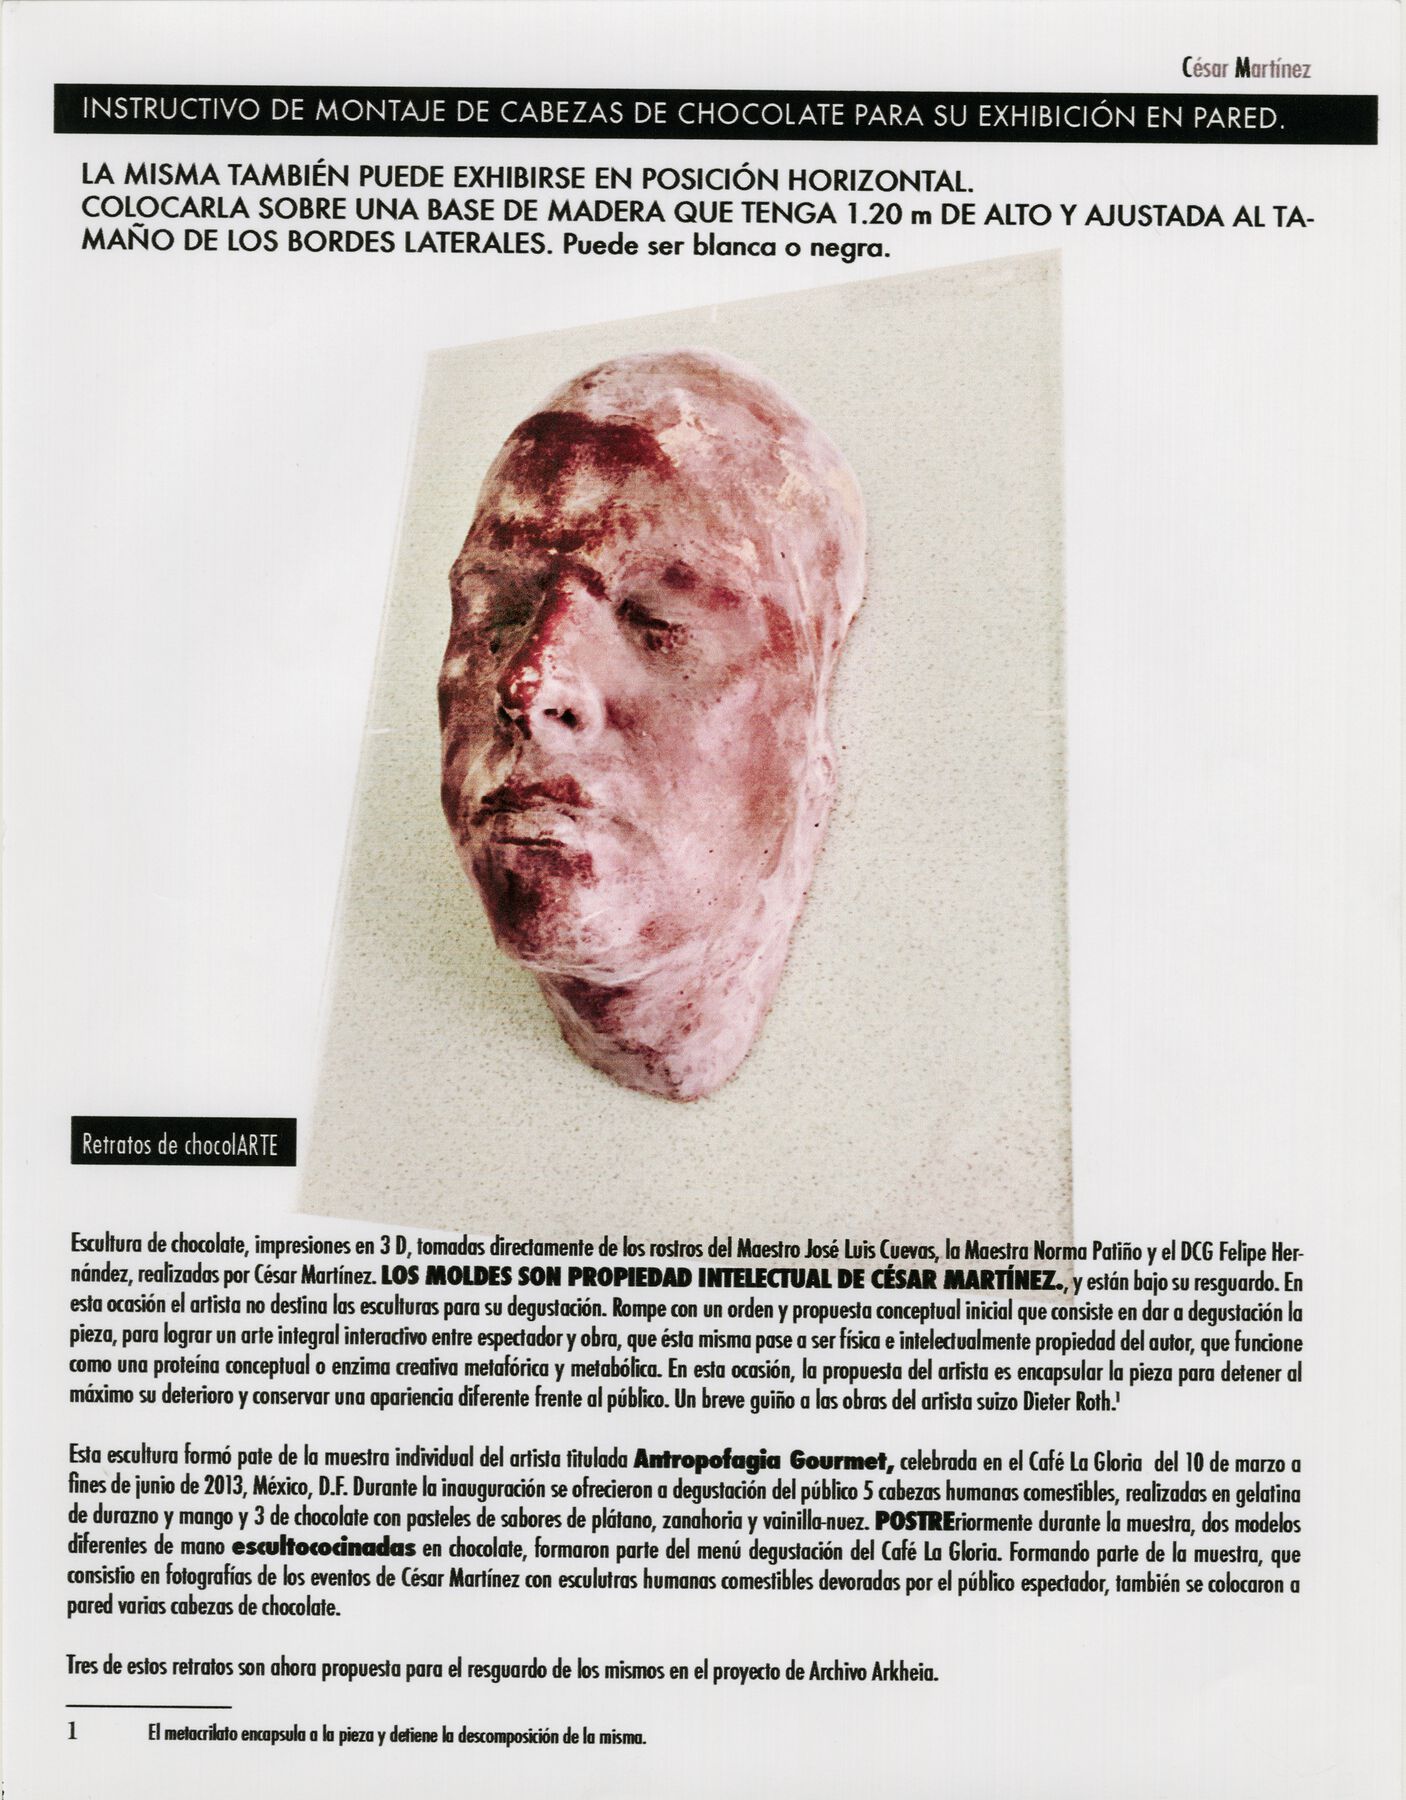 An article printing displaying a head sculpture made from chocolate that is mounted on a clear acrylic box